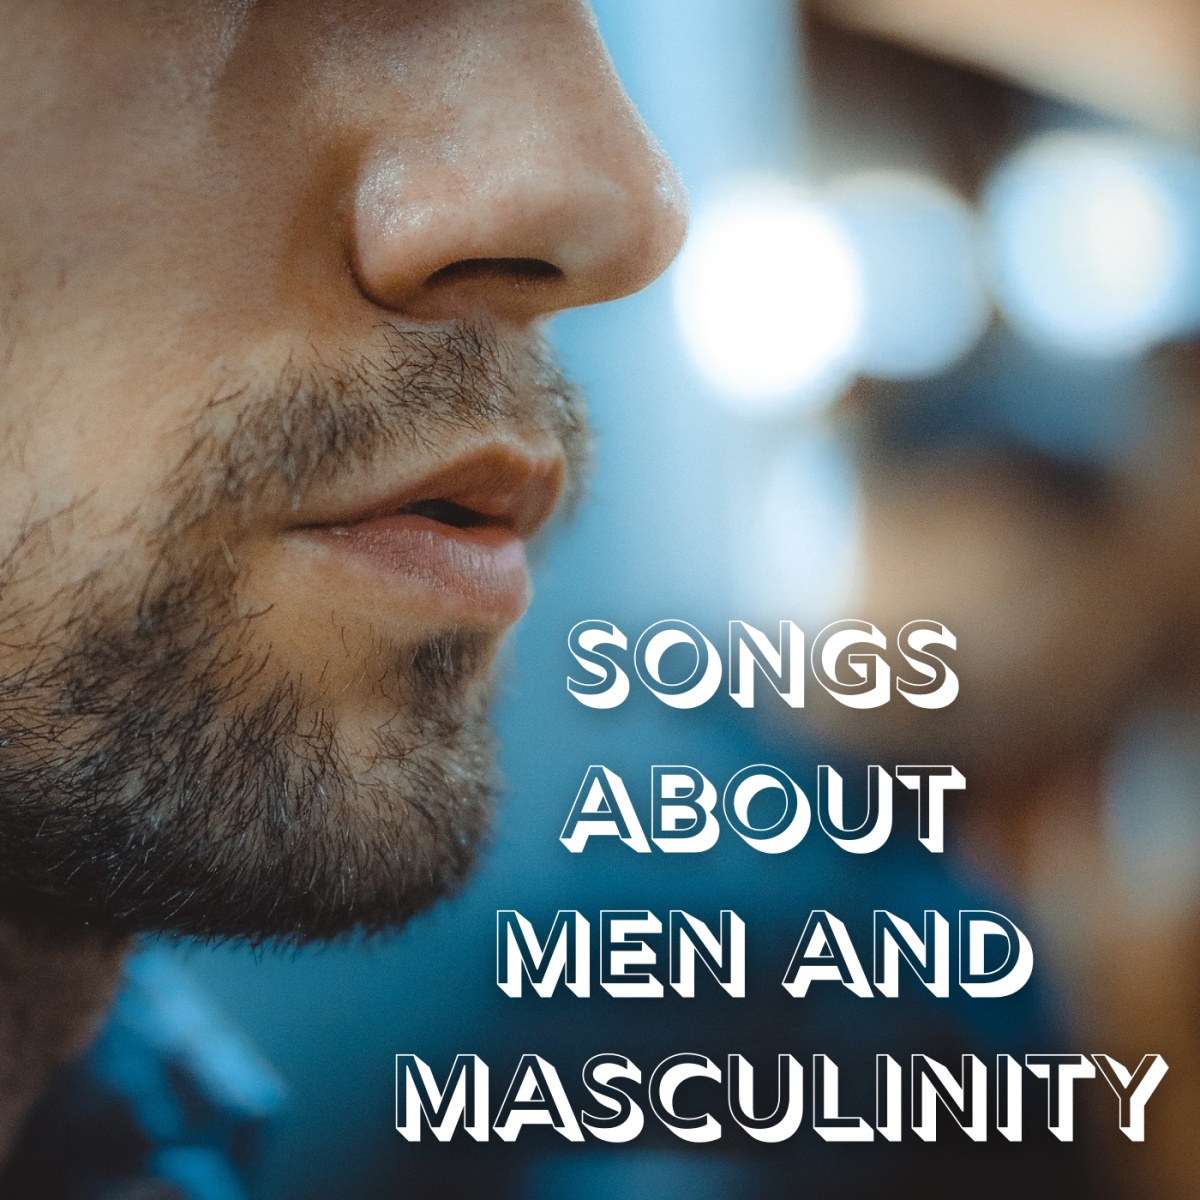 64 Songs About Men, Masculinity, and Being a Man